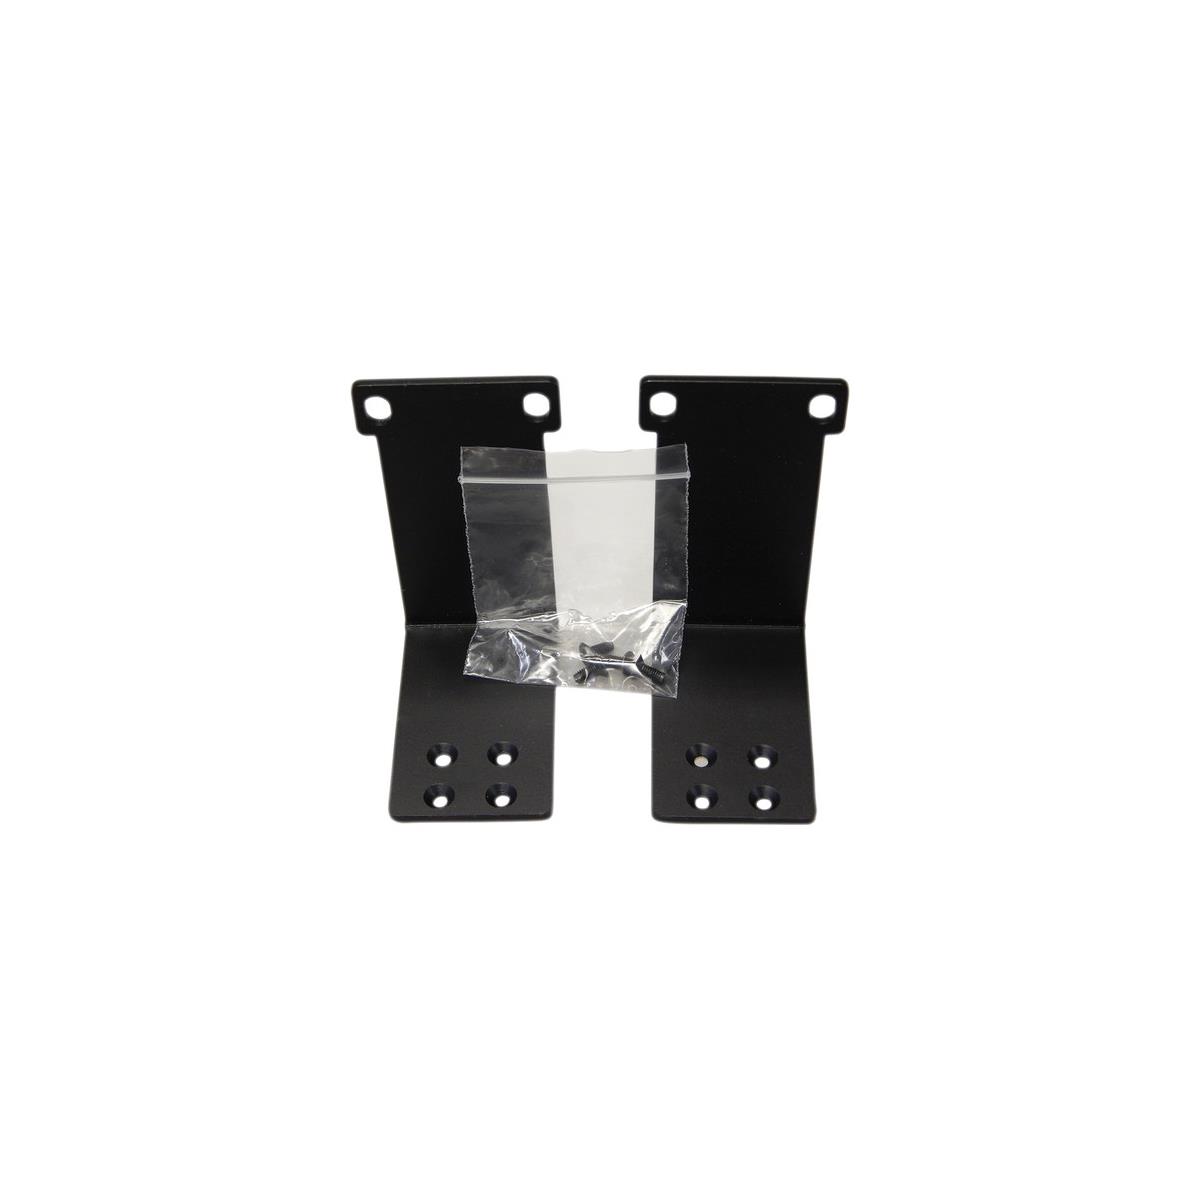 Image of Digital Watchdog 19&quot; Rack Mount Ears for VMAX Flex and VMAX 960H CORE Cameras